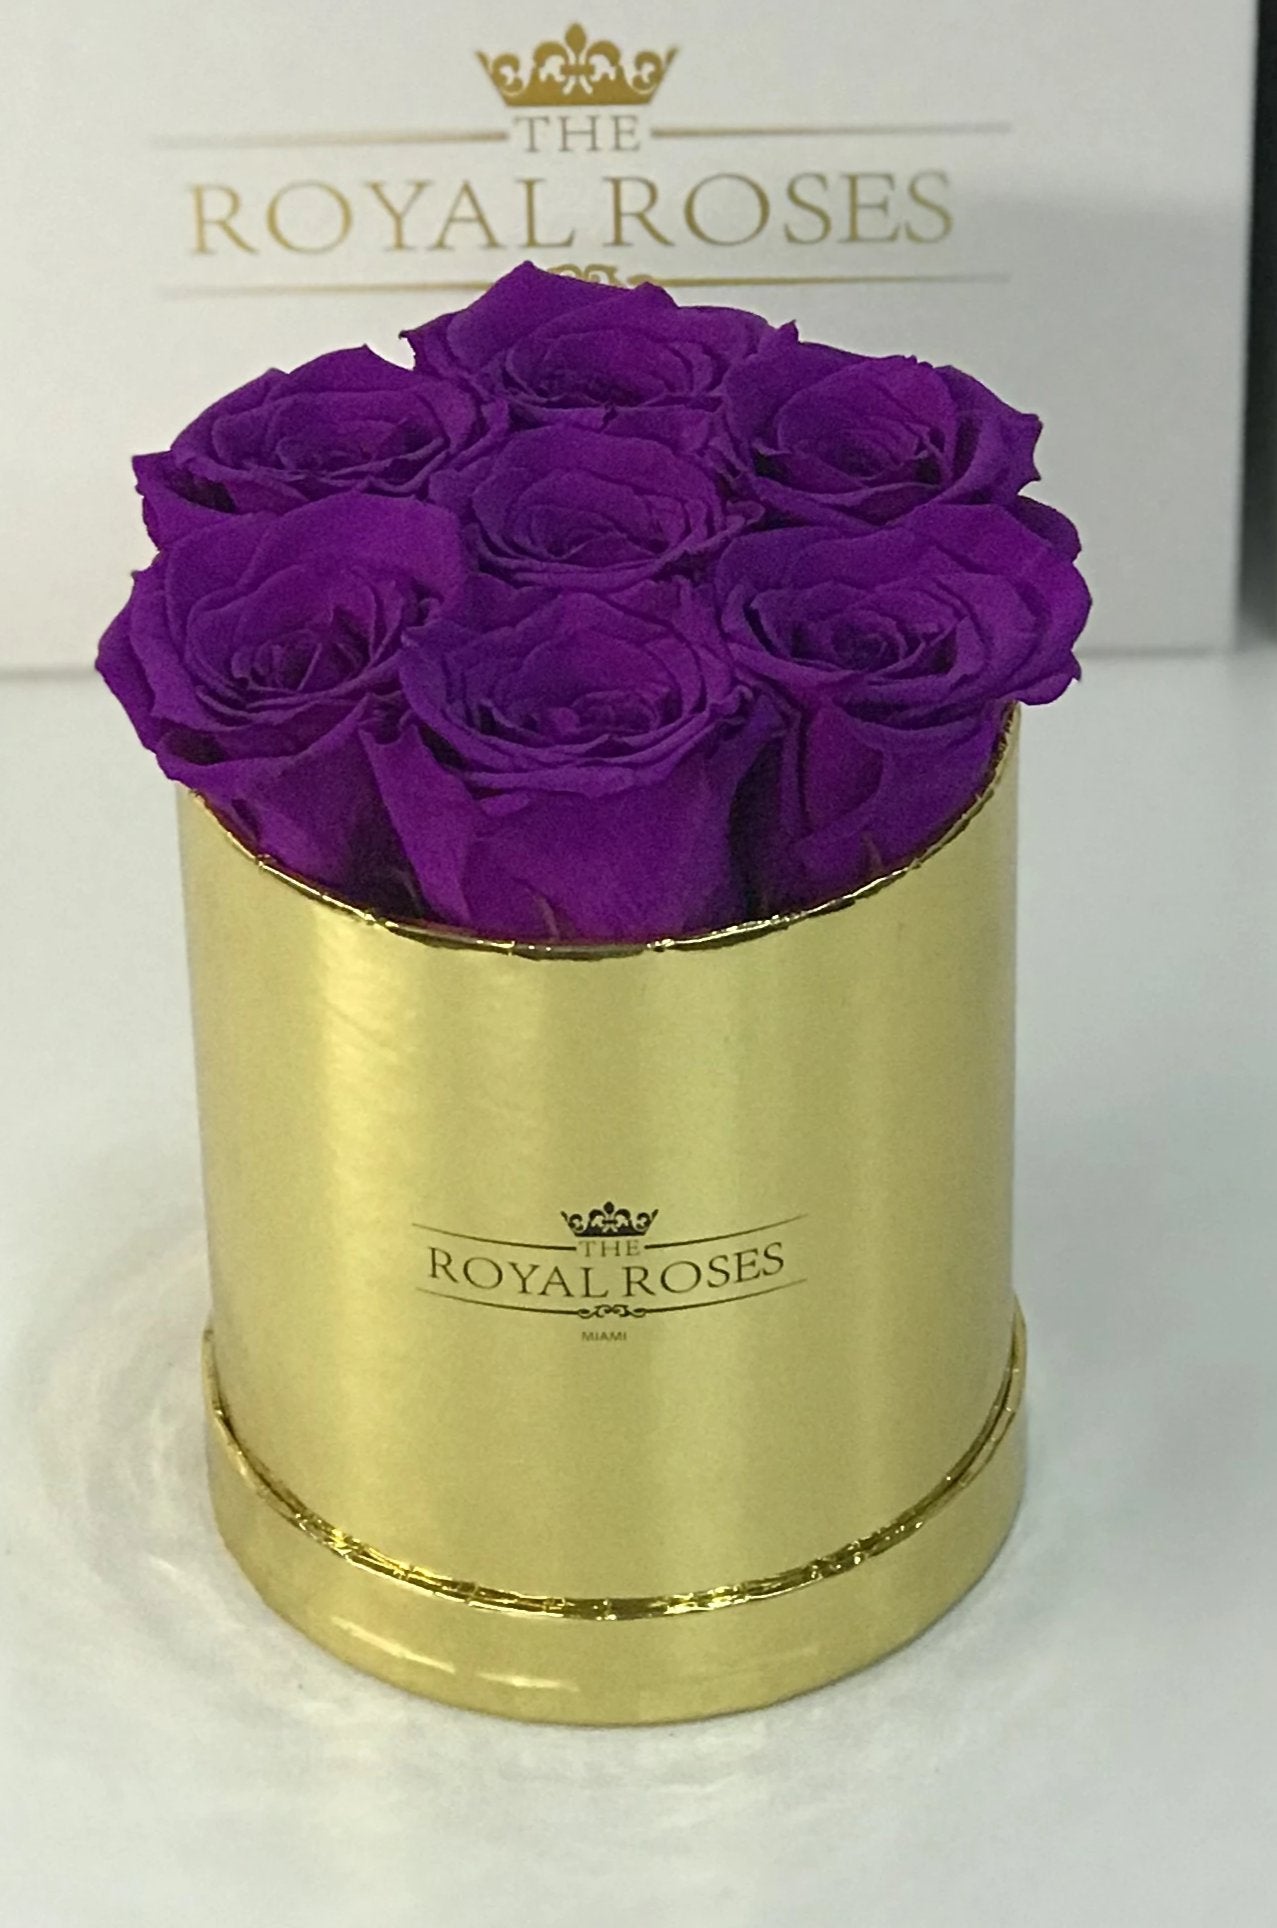 Mini Round Real Luxury Rose Box - Lifetime is Over 1 Year - The Royal Roses 